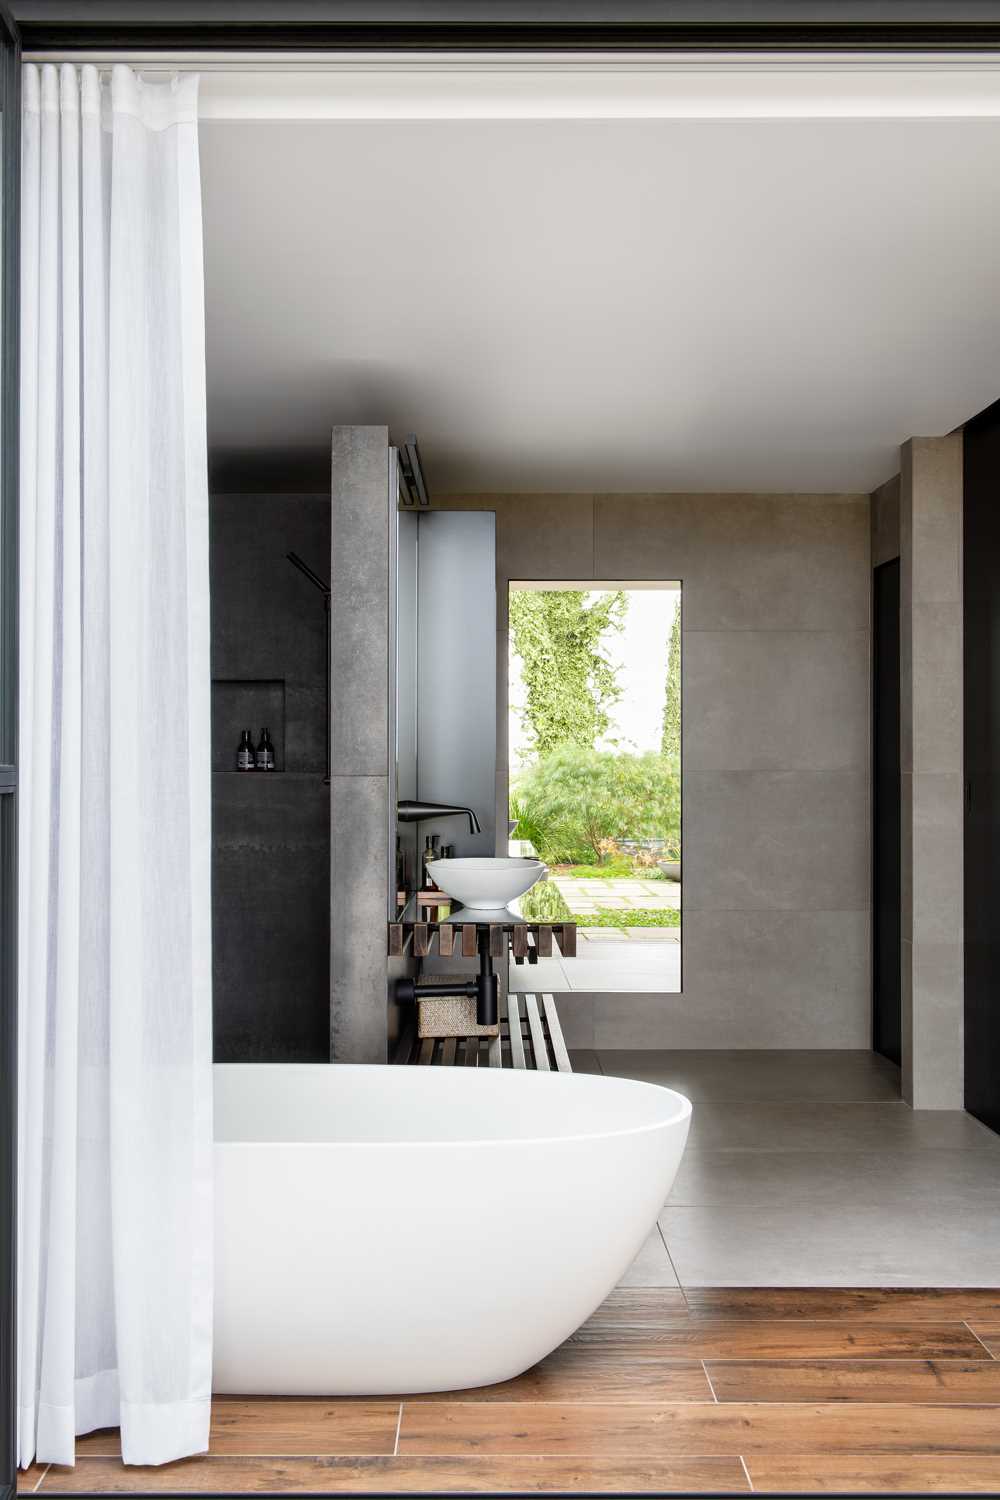 In this modern bathroom, there's a freestanding bathtub, a vanity with open wood shelving, a walk-in shower is positioned behind the wall, and a mirror reflecting the view of the garden.